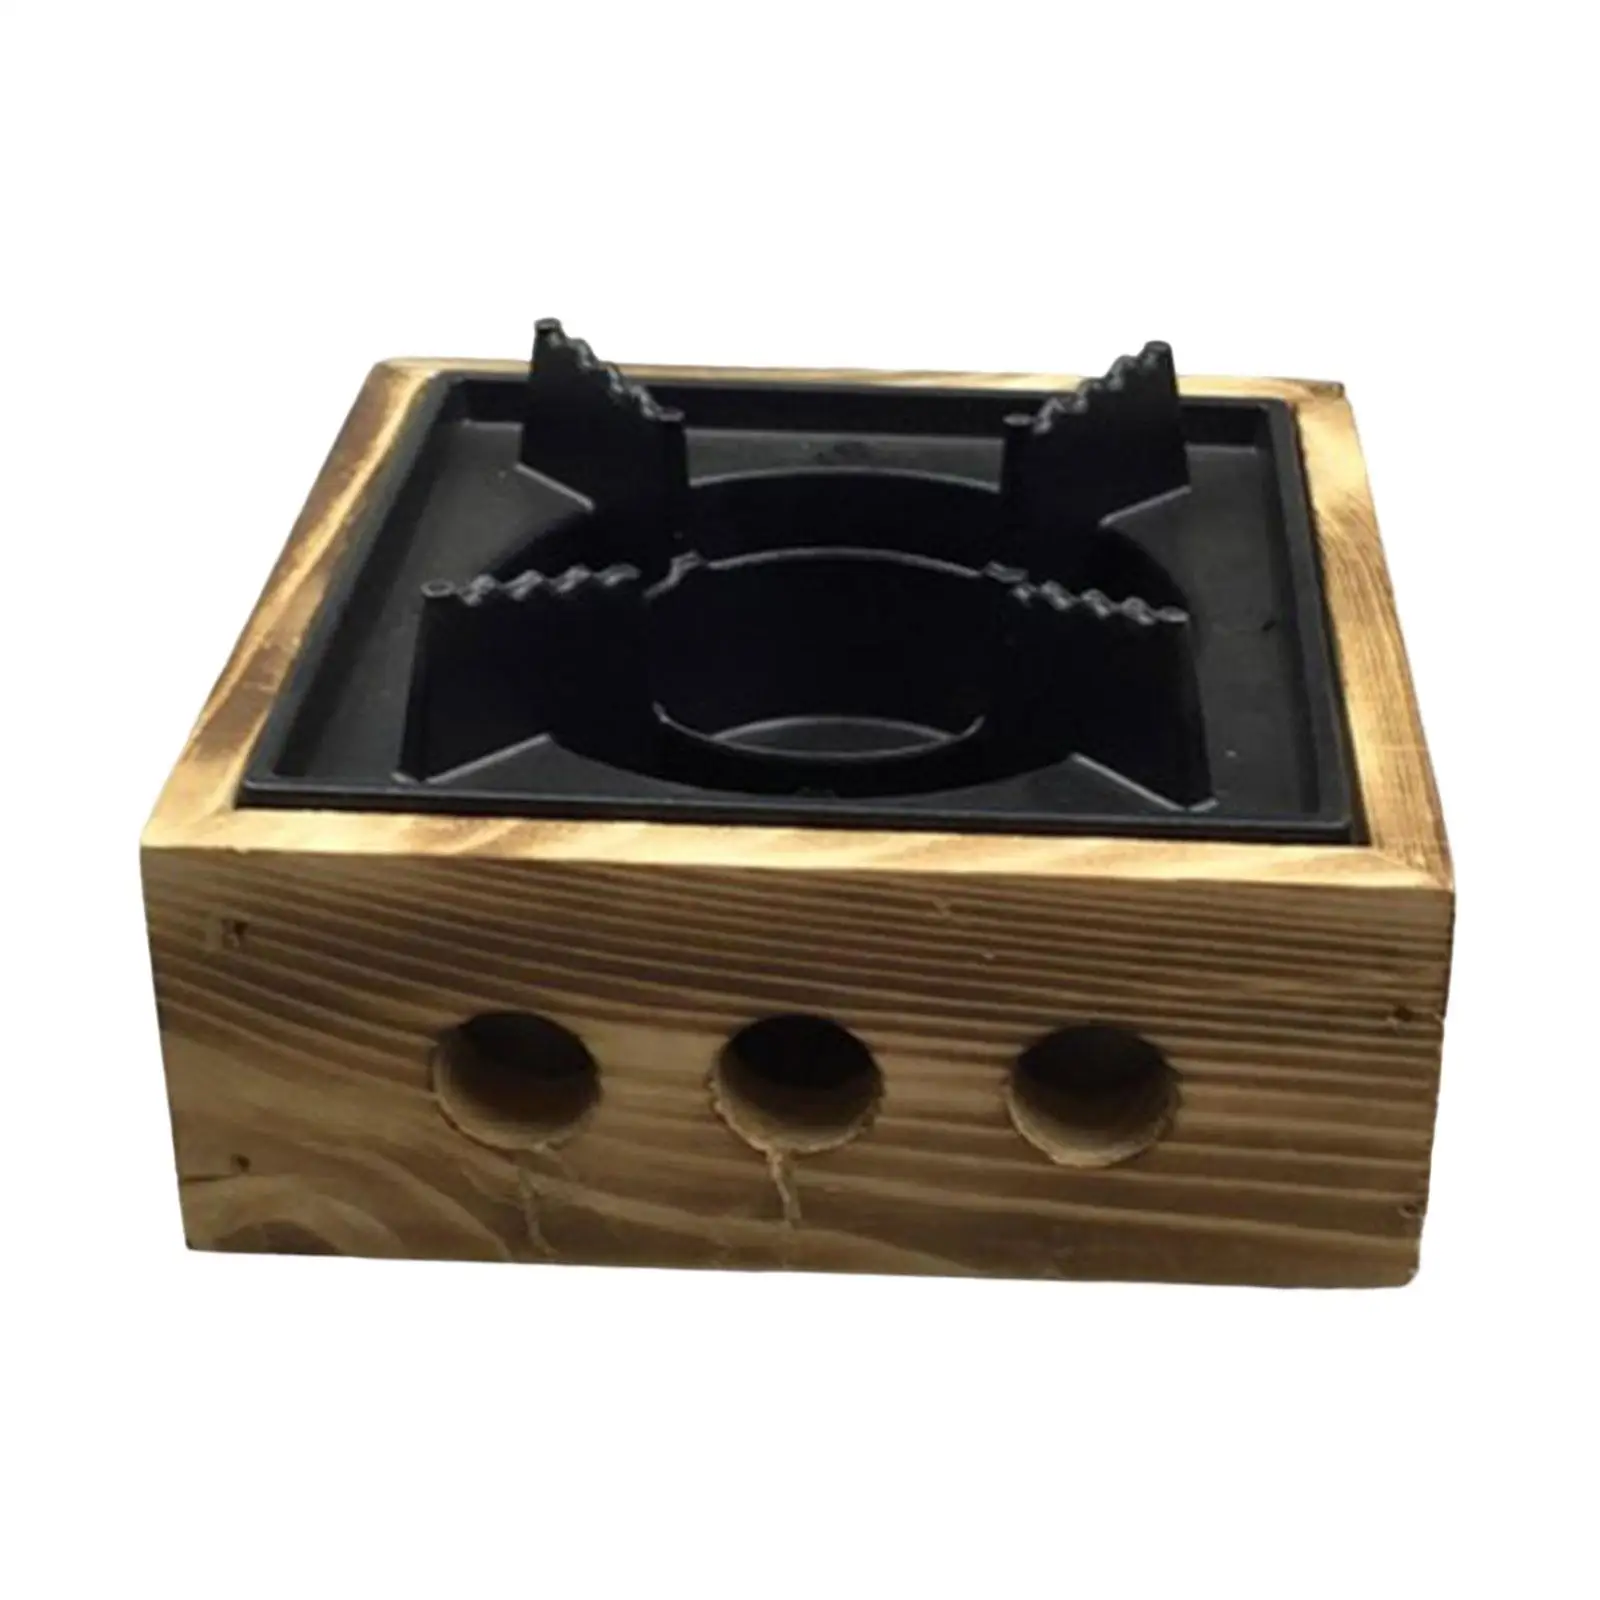 Alcohol Stoves Burner Solid Alcohol Stoves Square with Wooden Base for Camping Outdoor BBQ Hiking